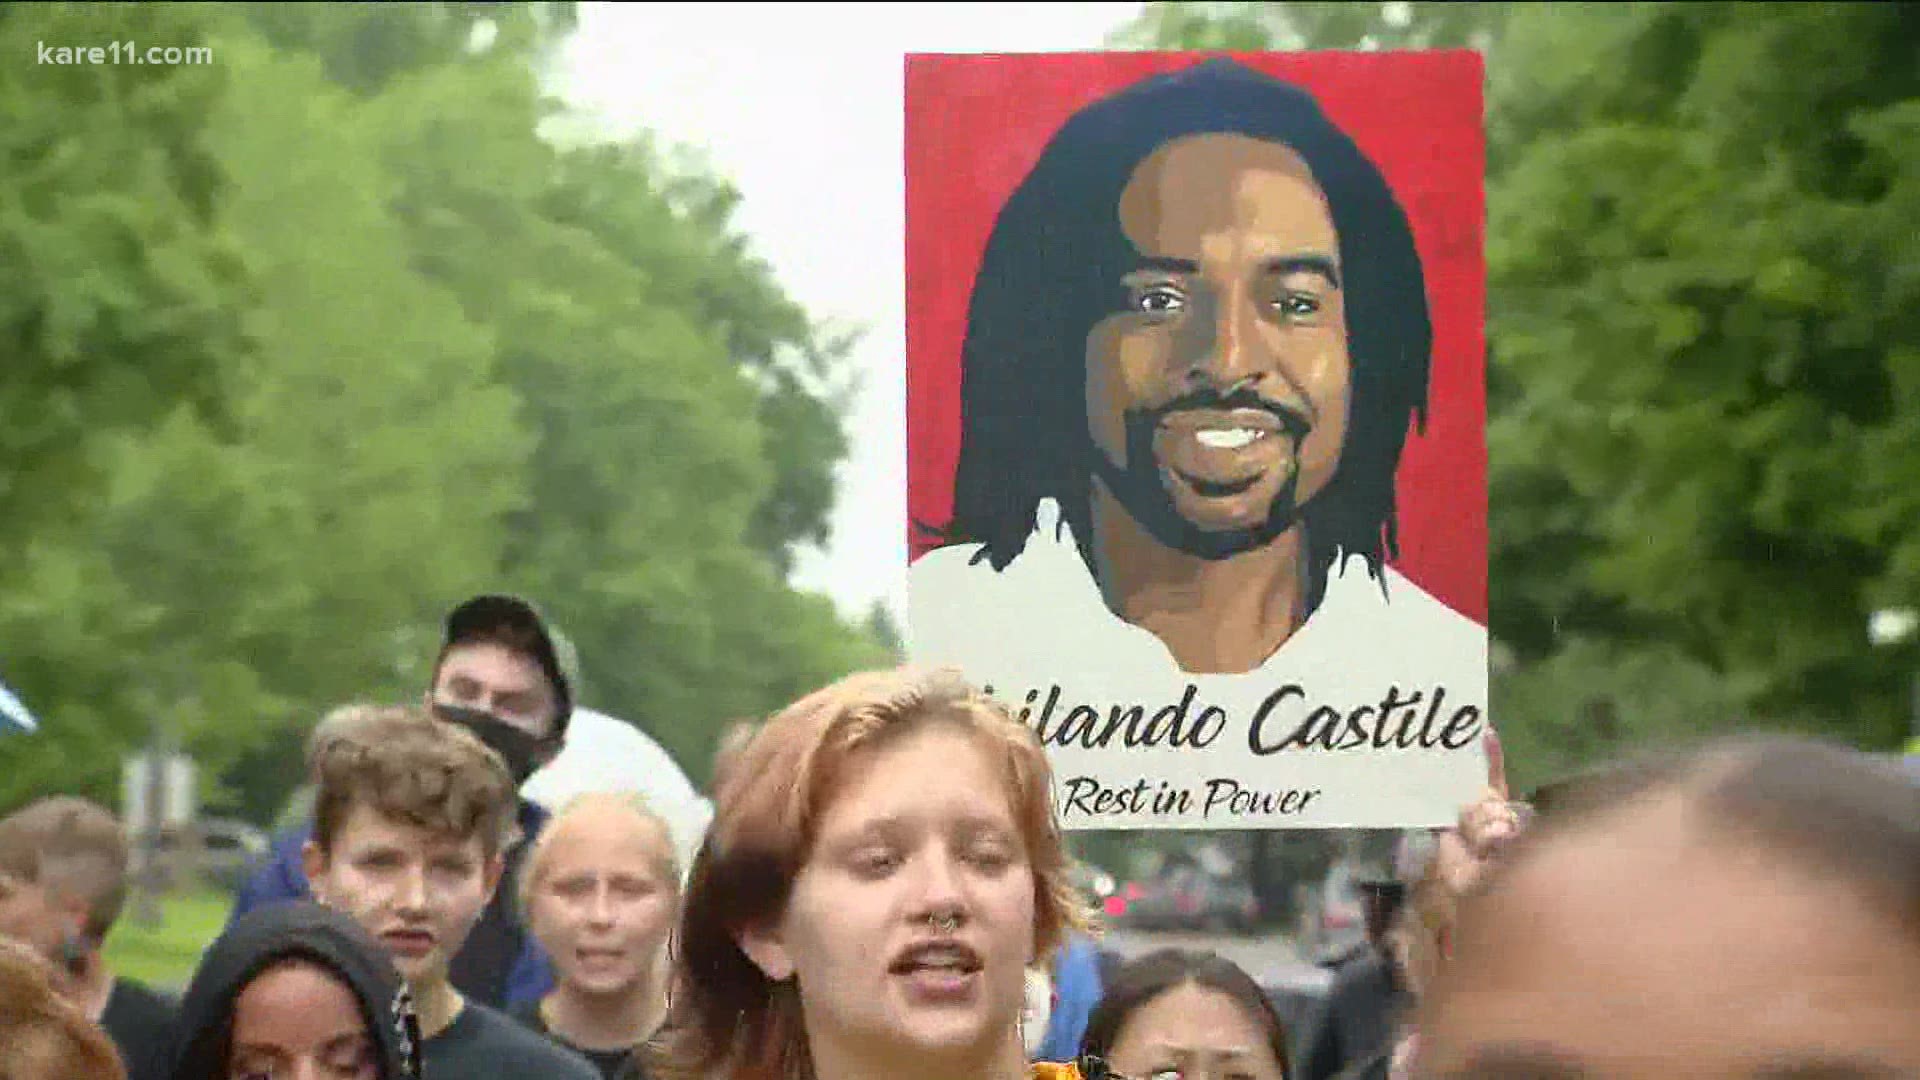 Castile was shot during a traffic stop in 2016 by former St. Anthony Police Officer Jeronimo Yanez.